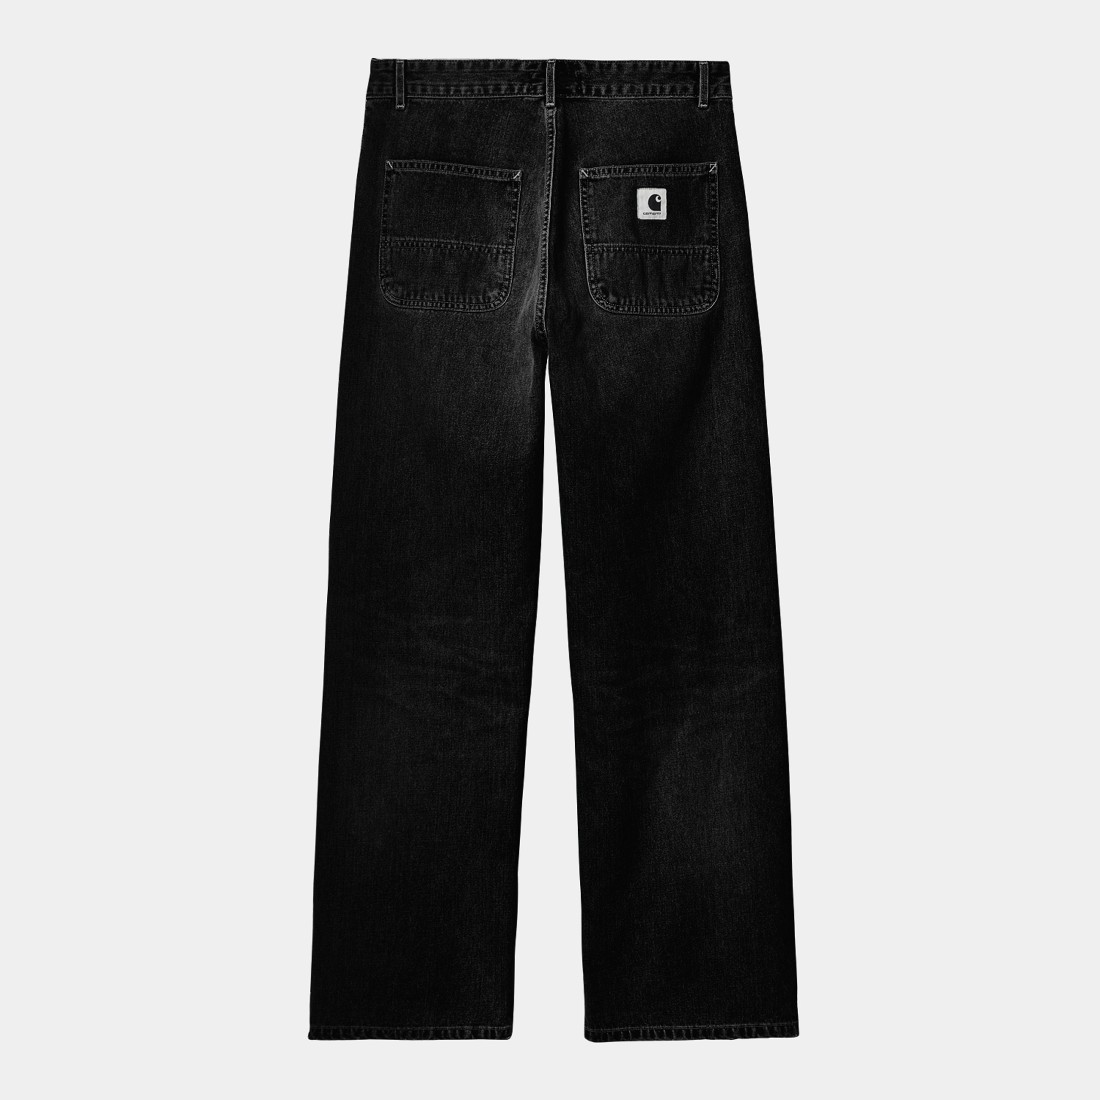 W' Simple Pant Black Stone Washed Carhartt WIP